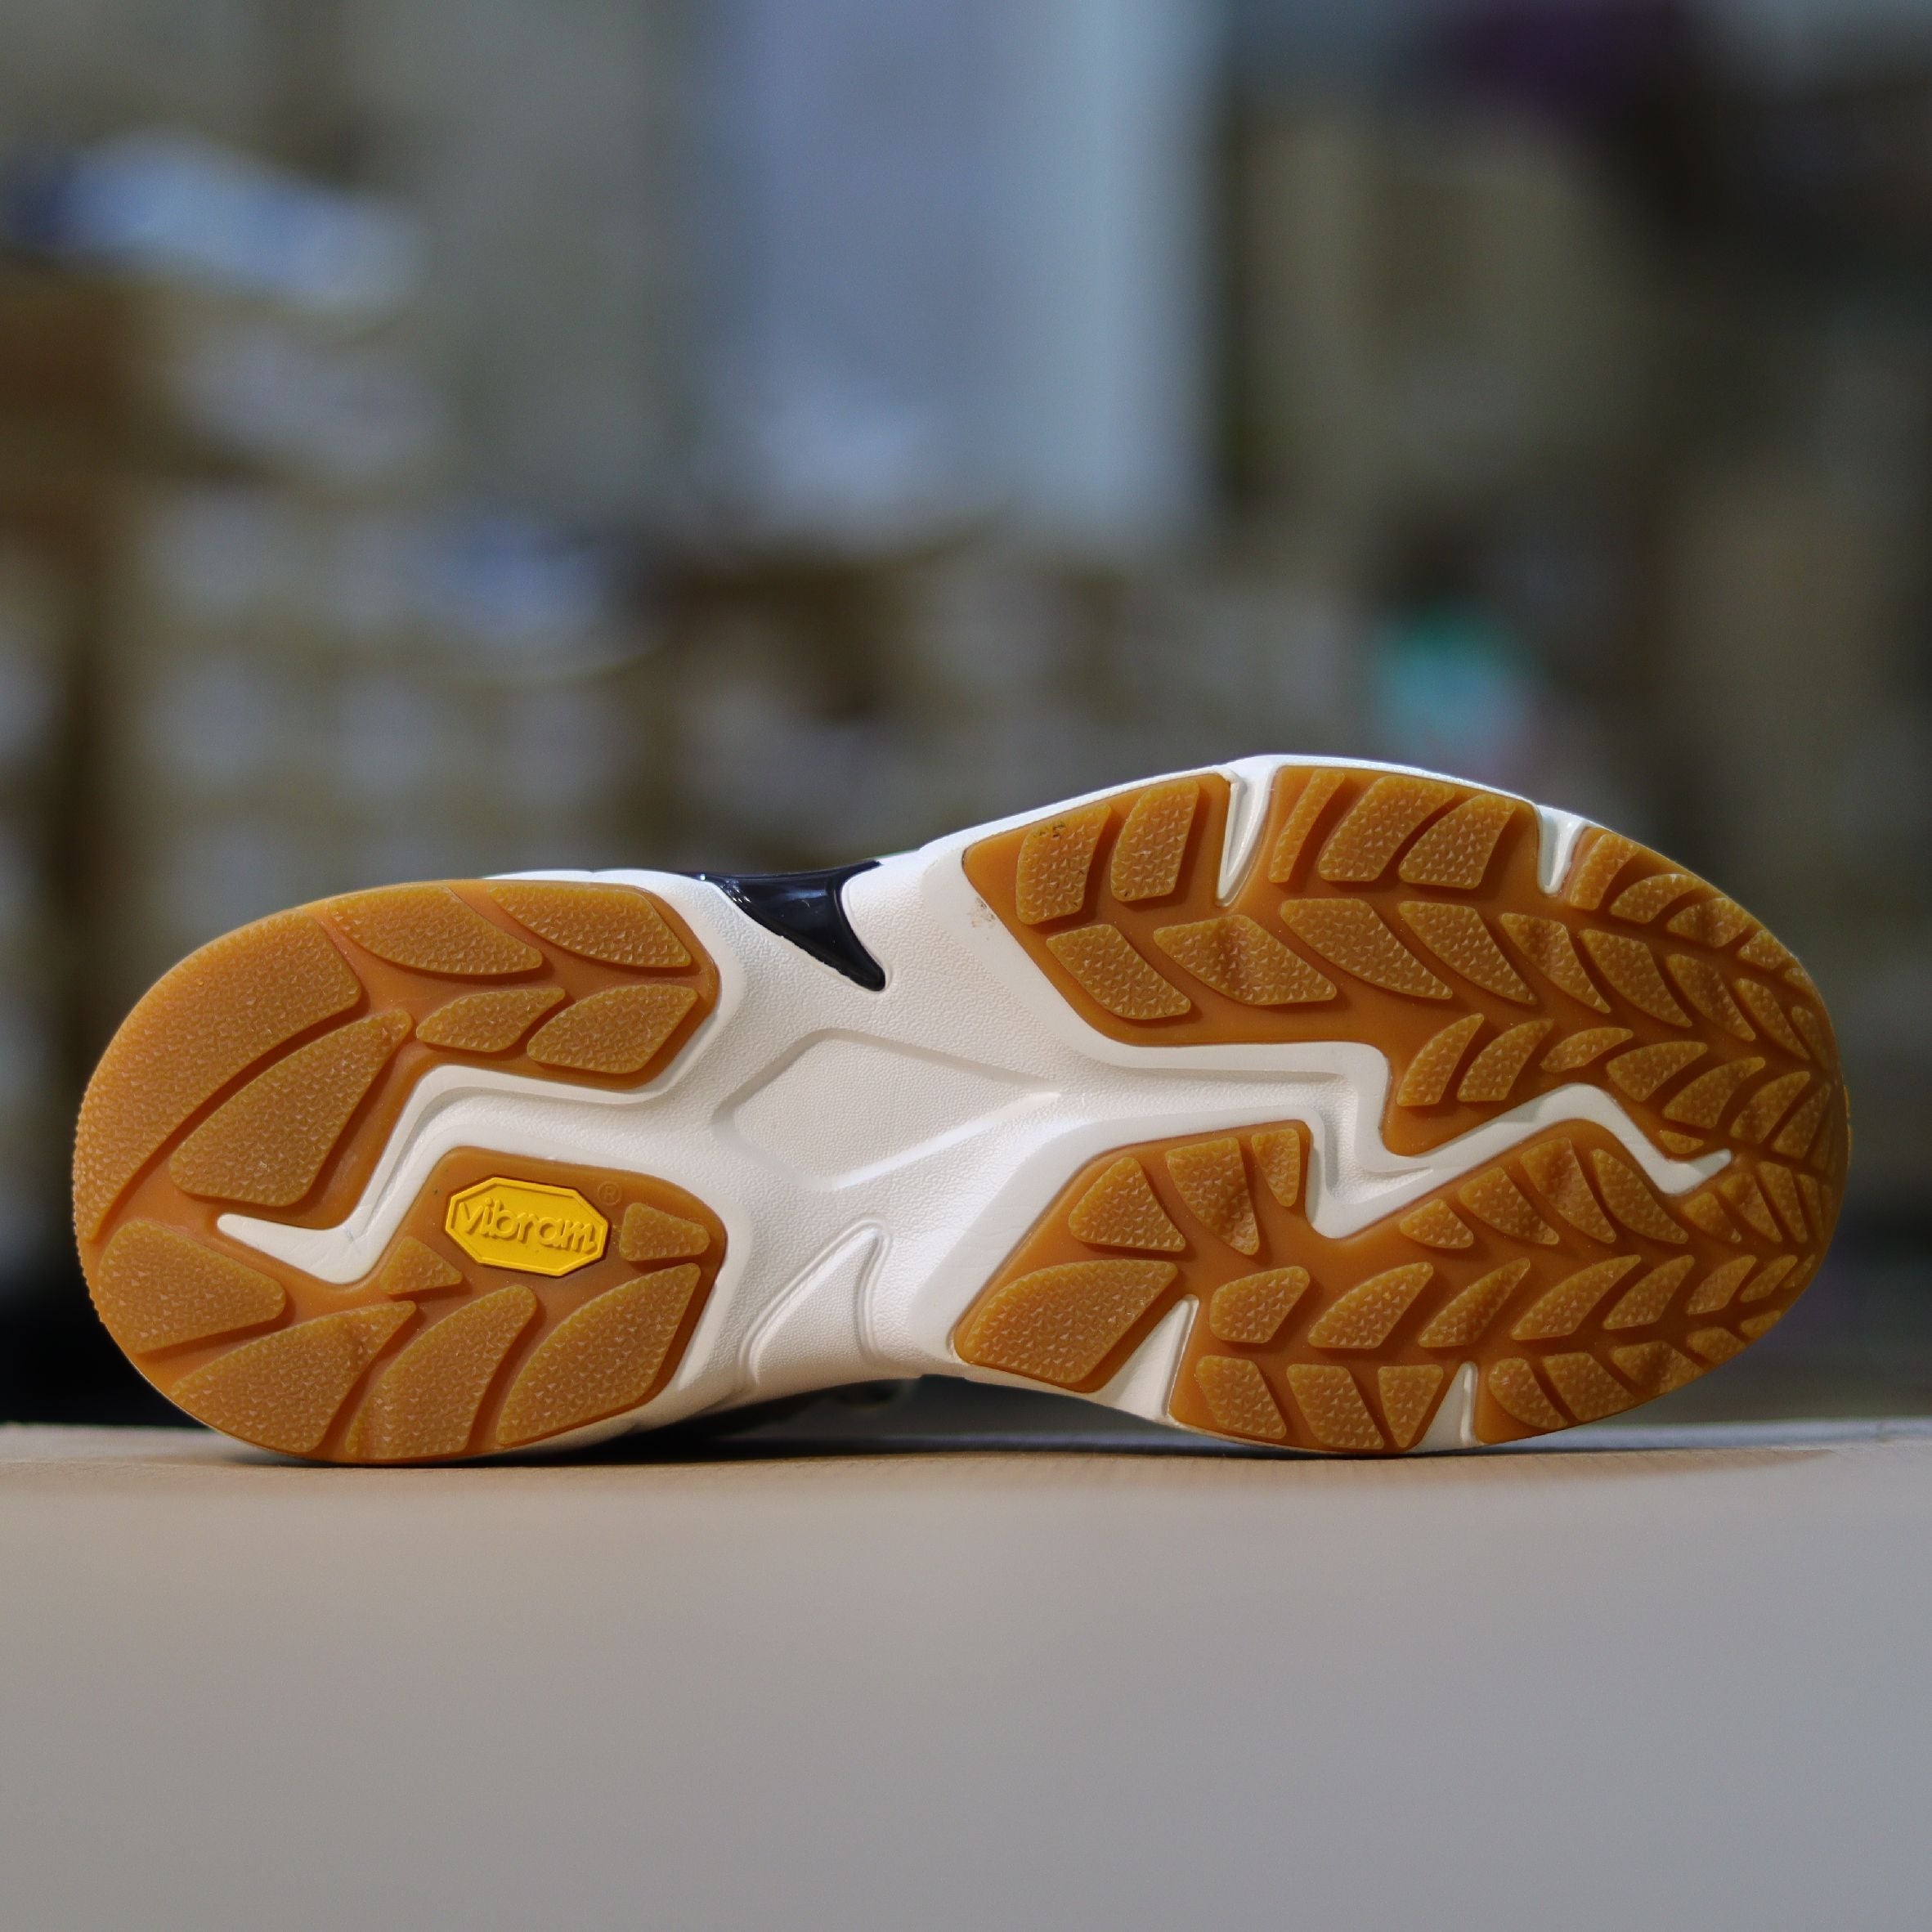 X13 - Vibram® Urban Ankle Shoes by Xtep®